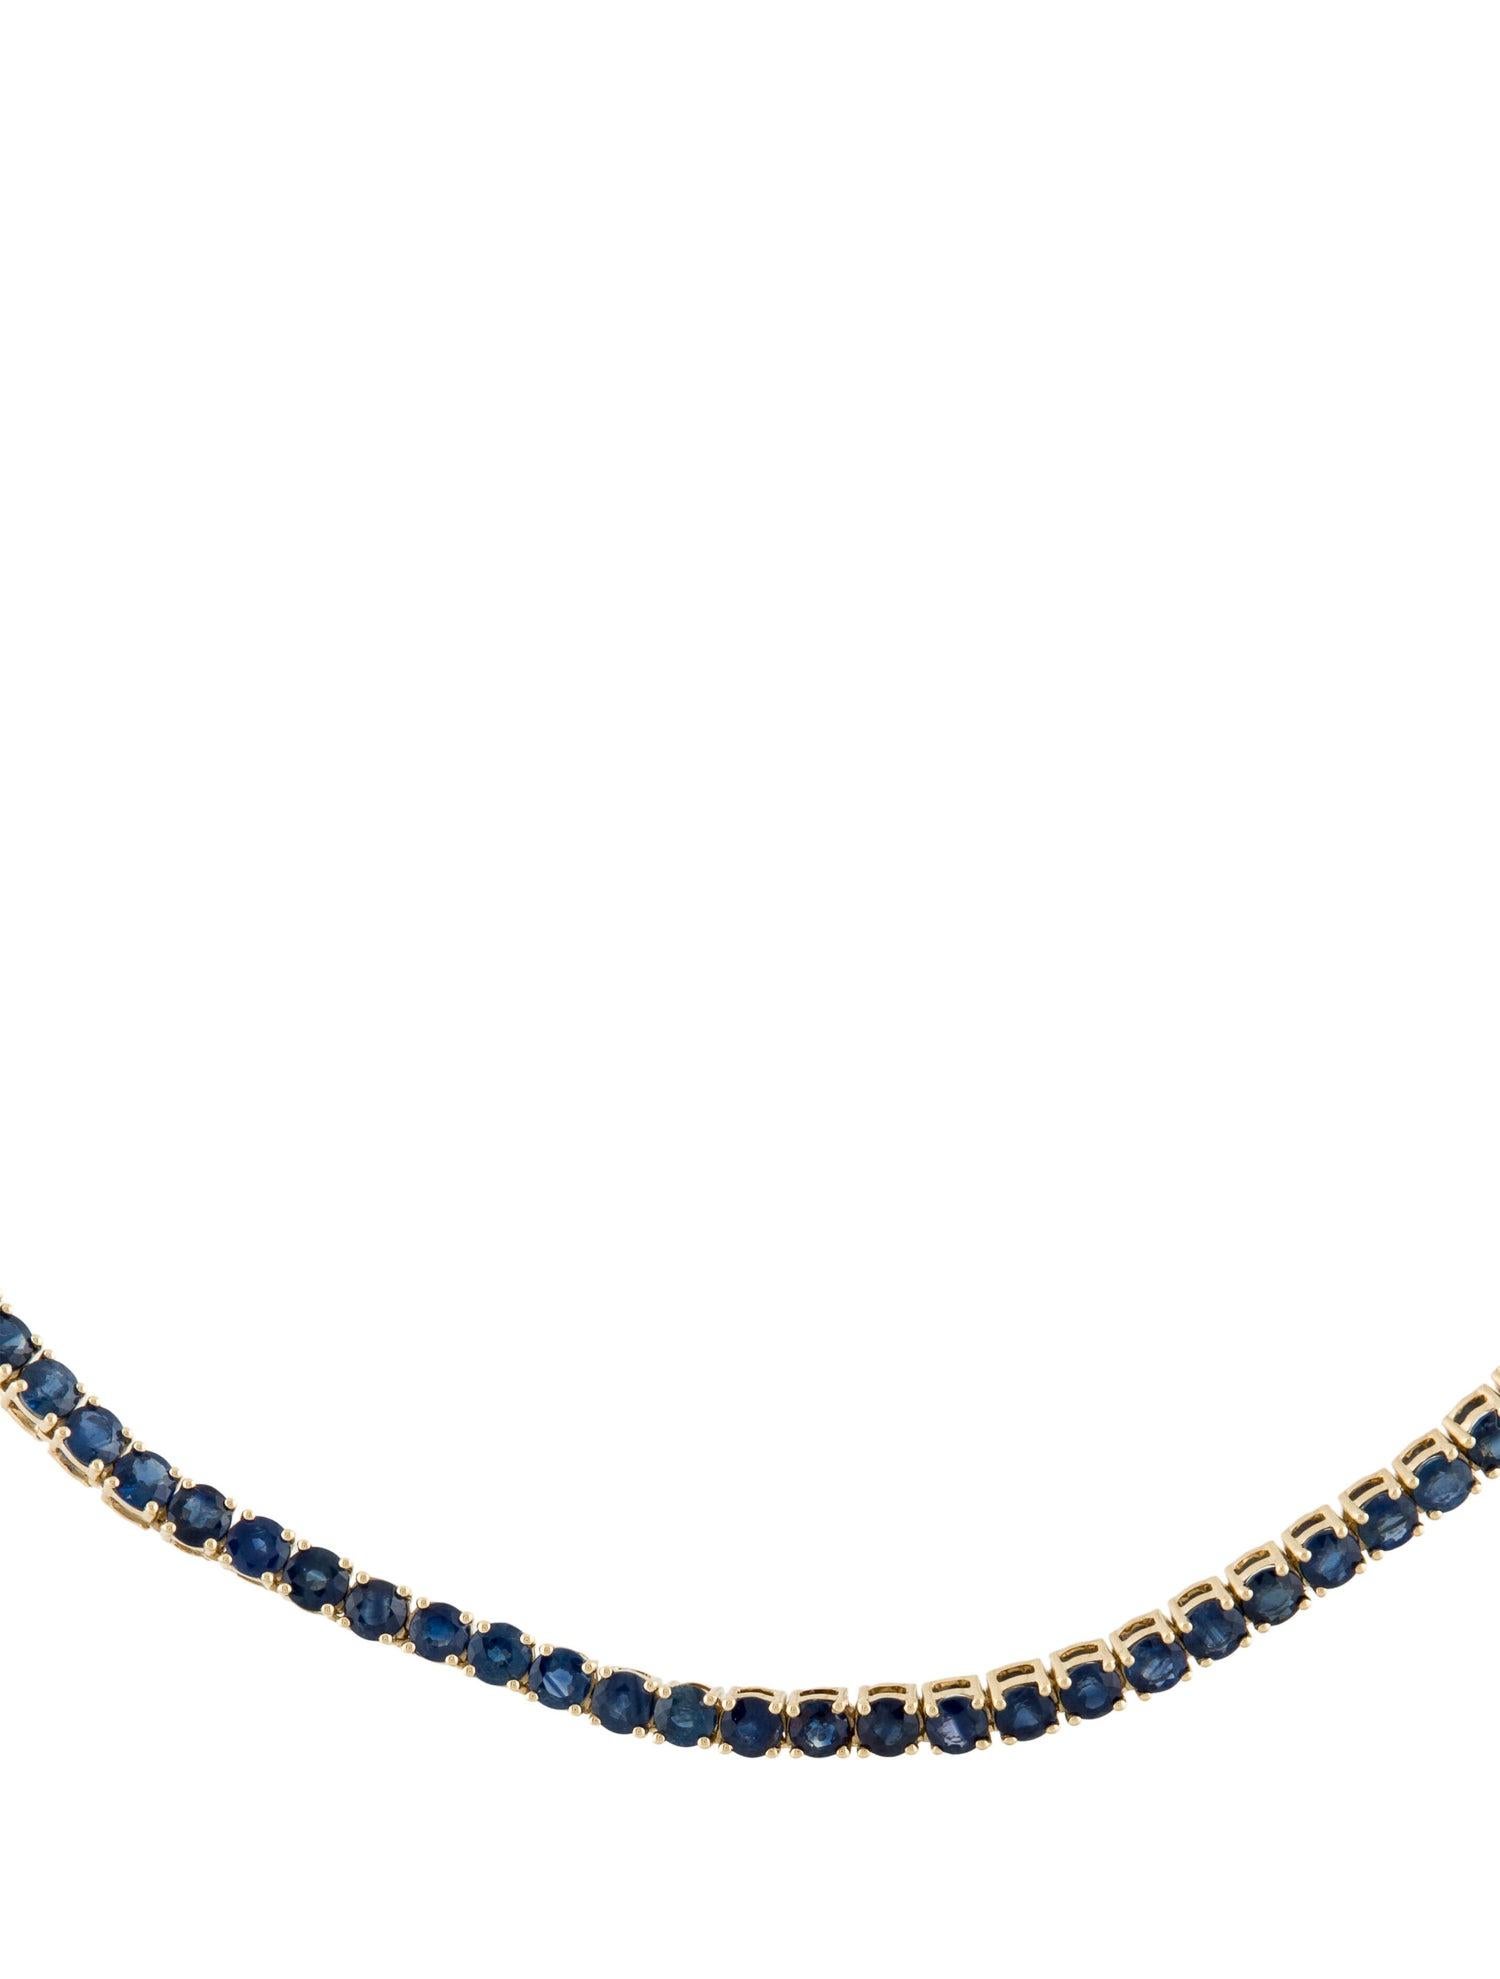 Brilliant Cut 14K Sapphire Collar Necklace 10.71ctw - Exquisite Statement Jewelry for Elegance For Sale